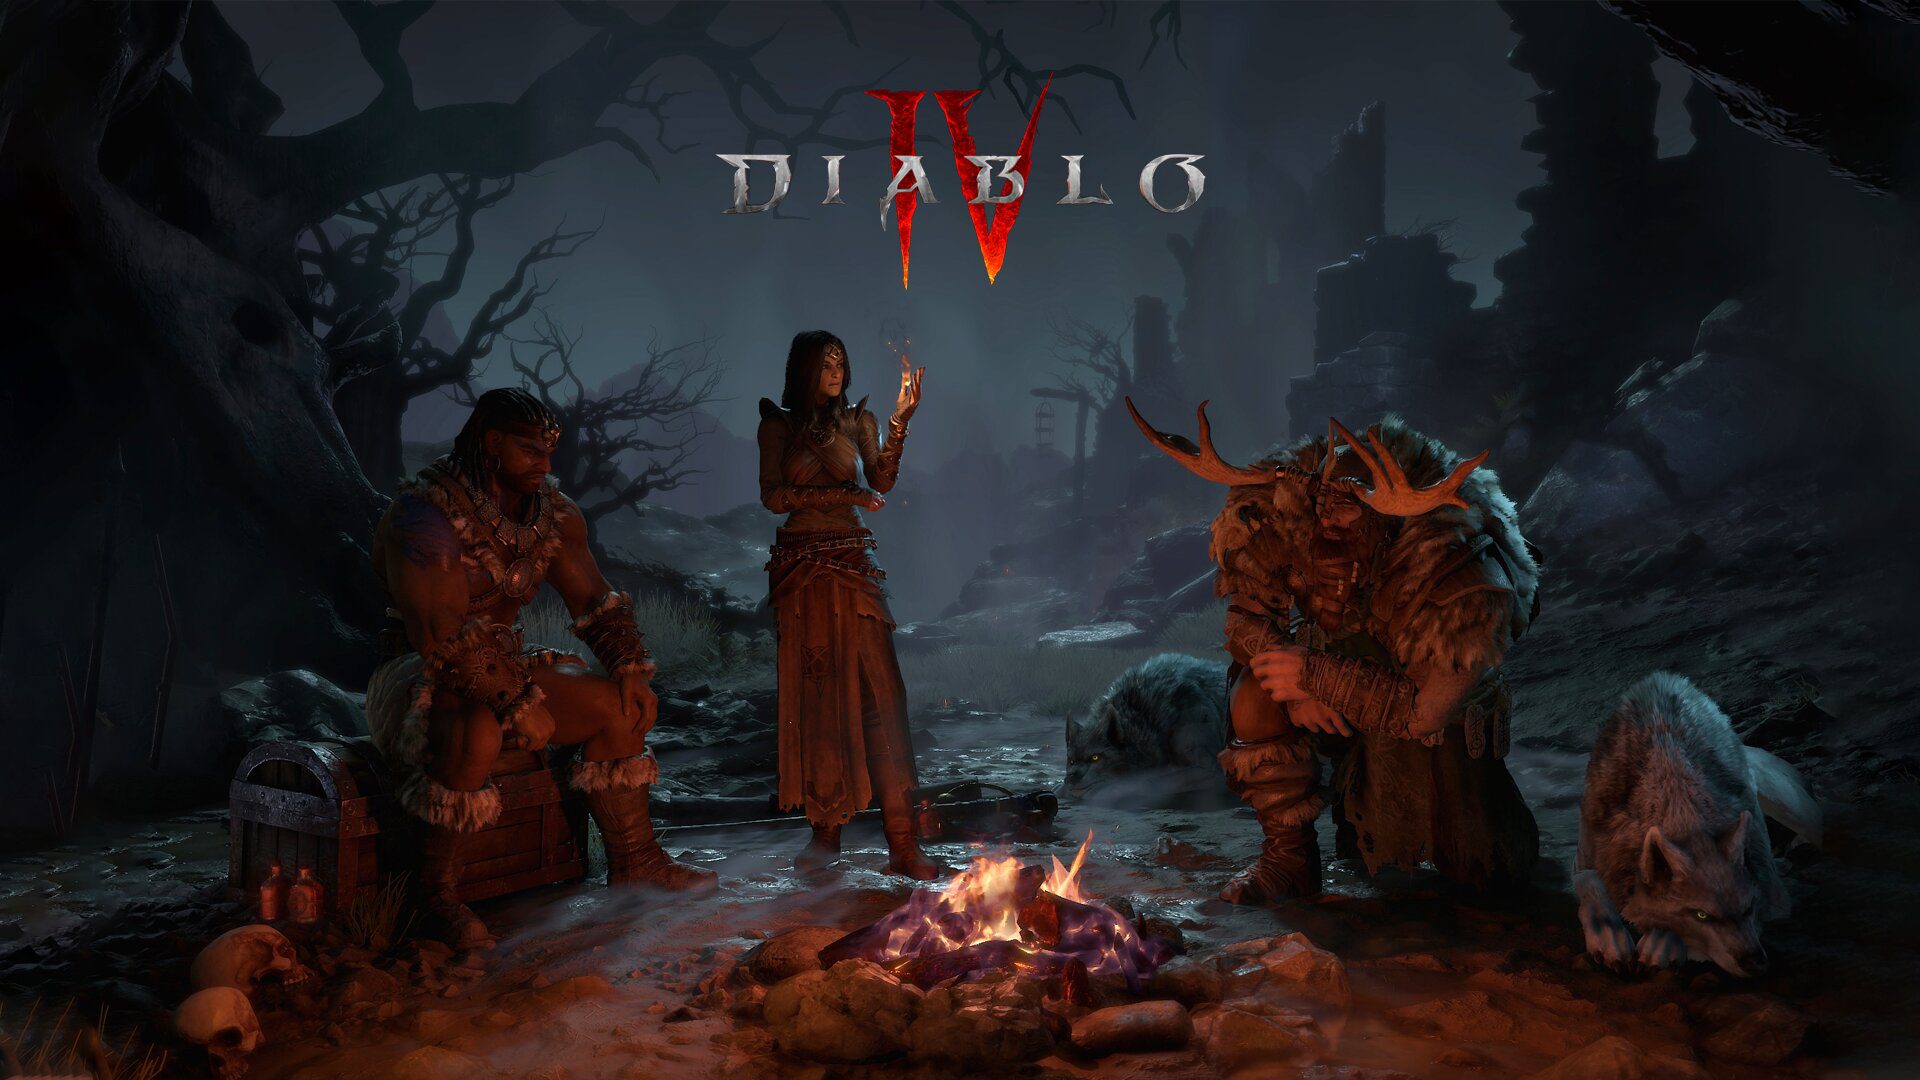 Diablo 4 paid content would be purely aesthetic according to Blizzard